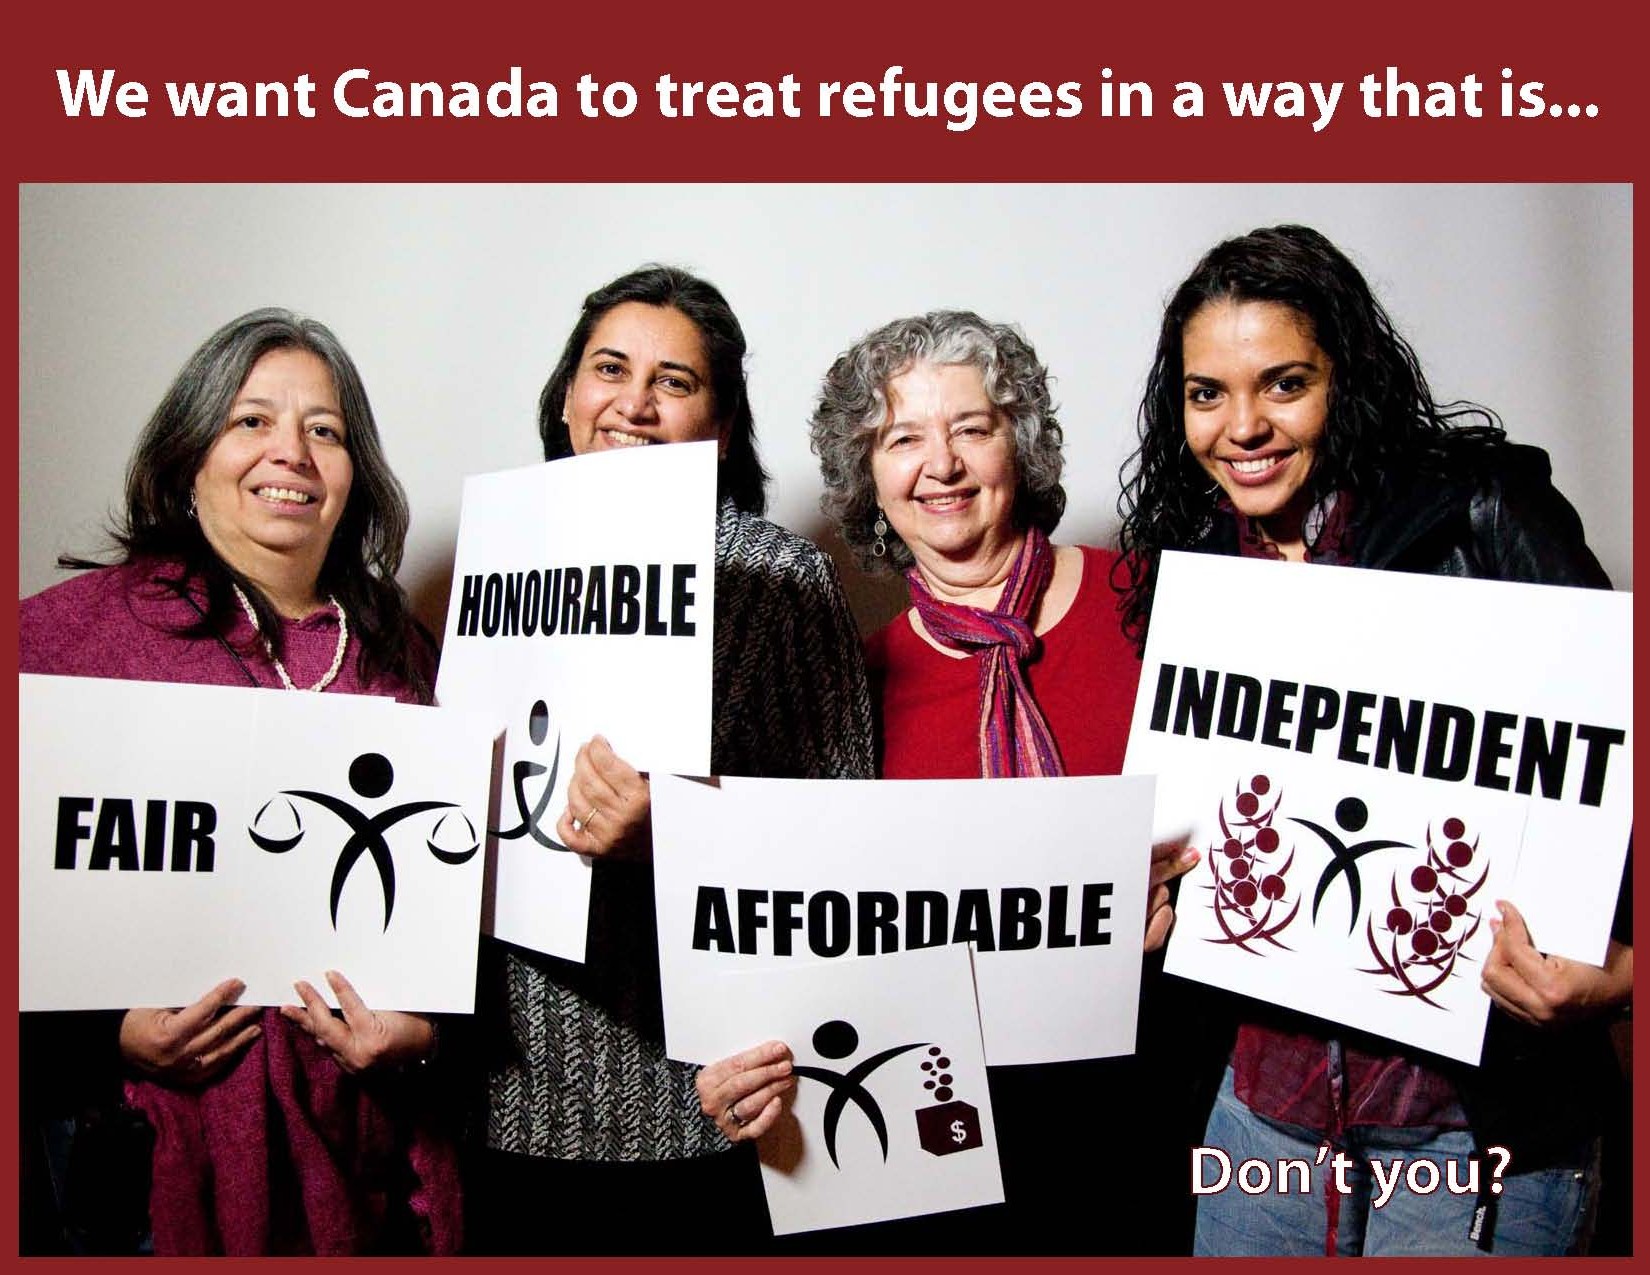 What we want for refugees in Canada